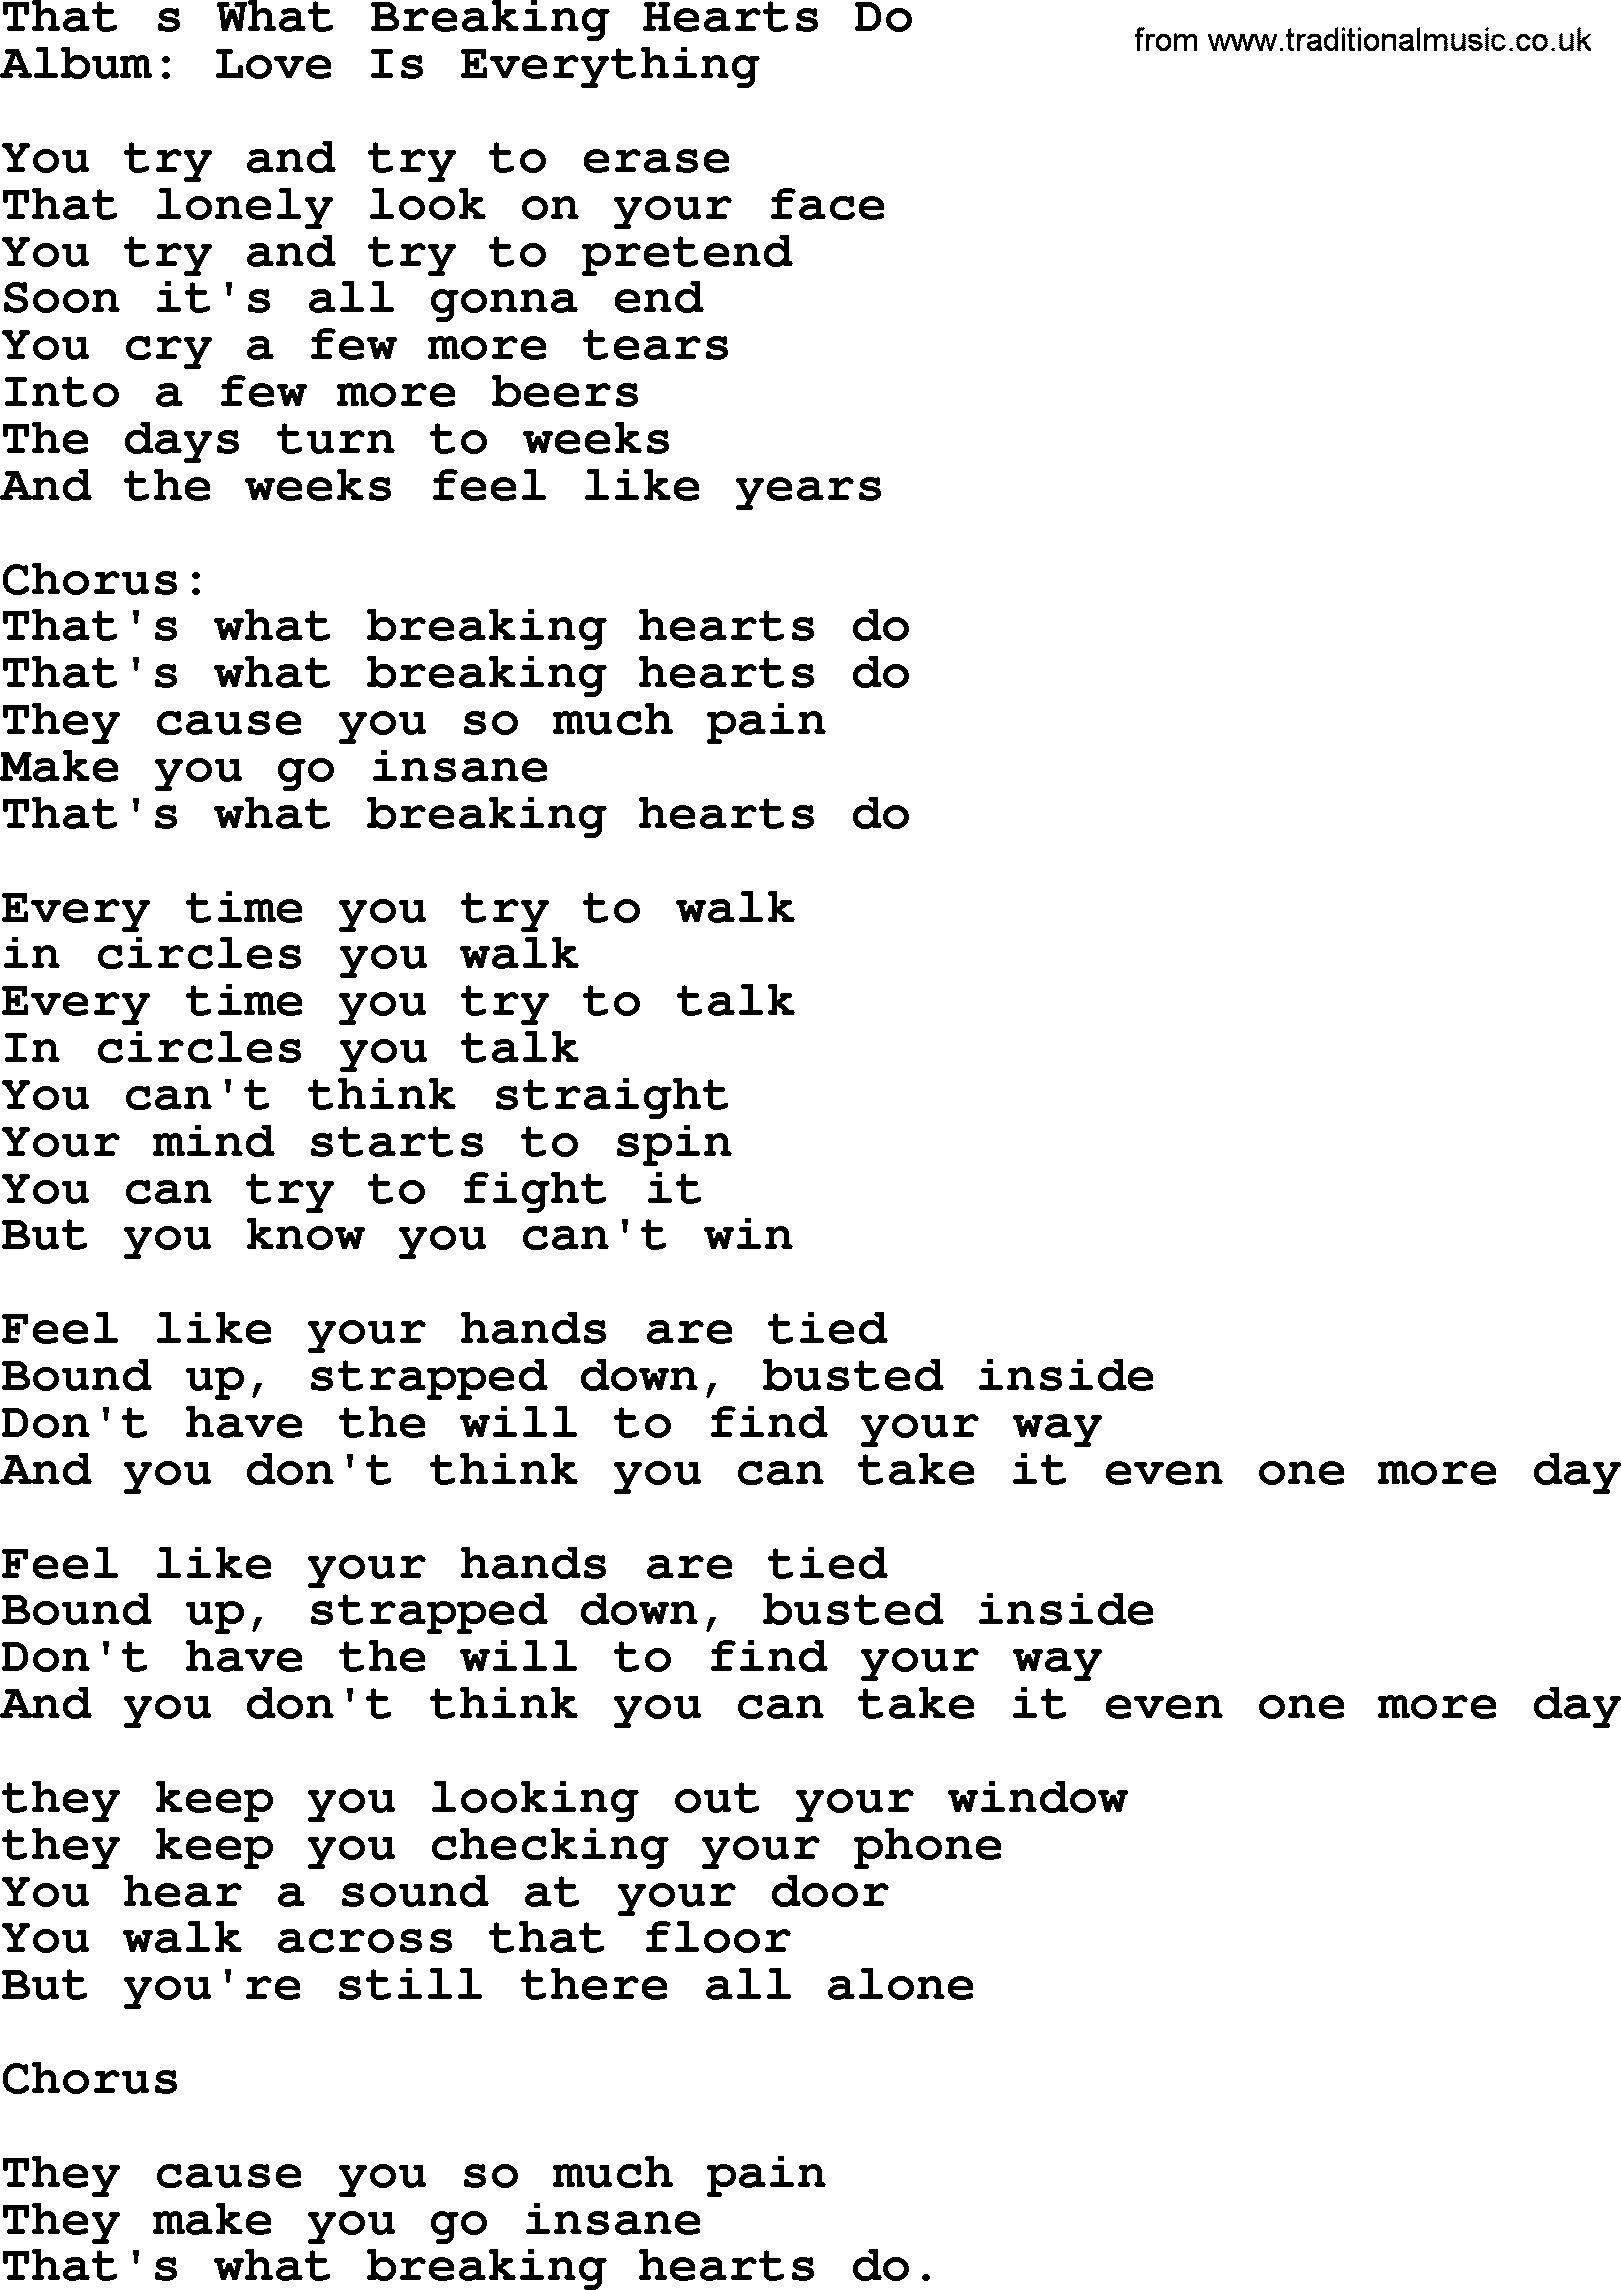 George Strait song: That s What Breaking Hearts Do, lyrics